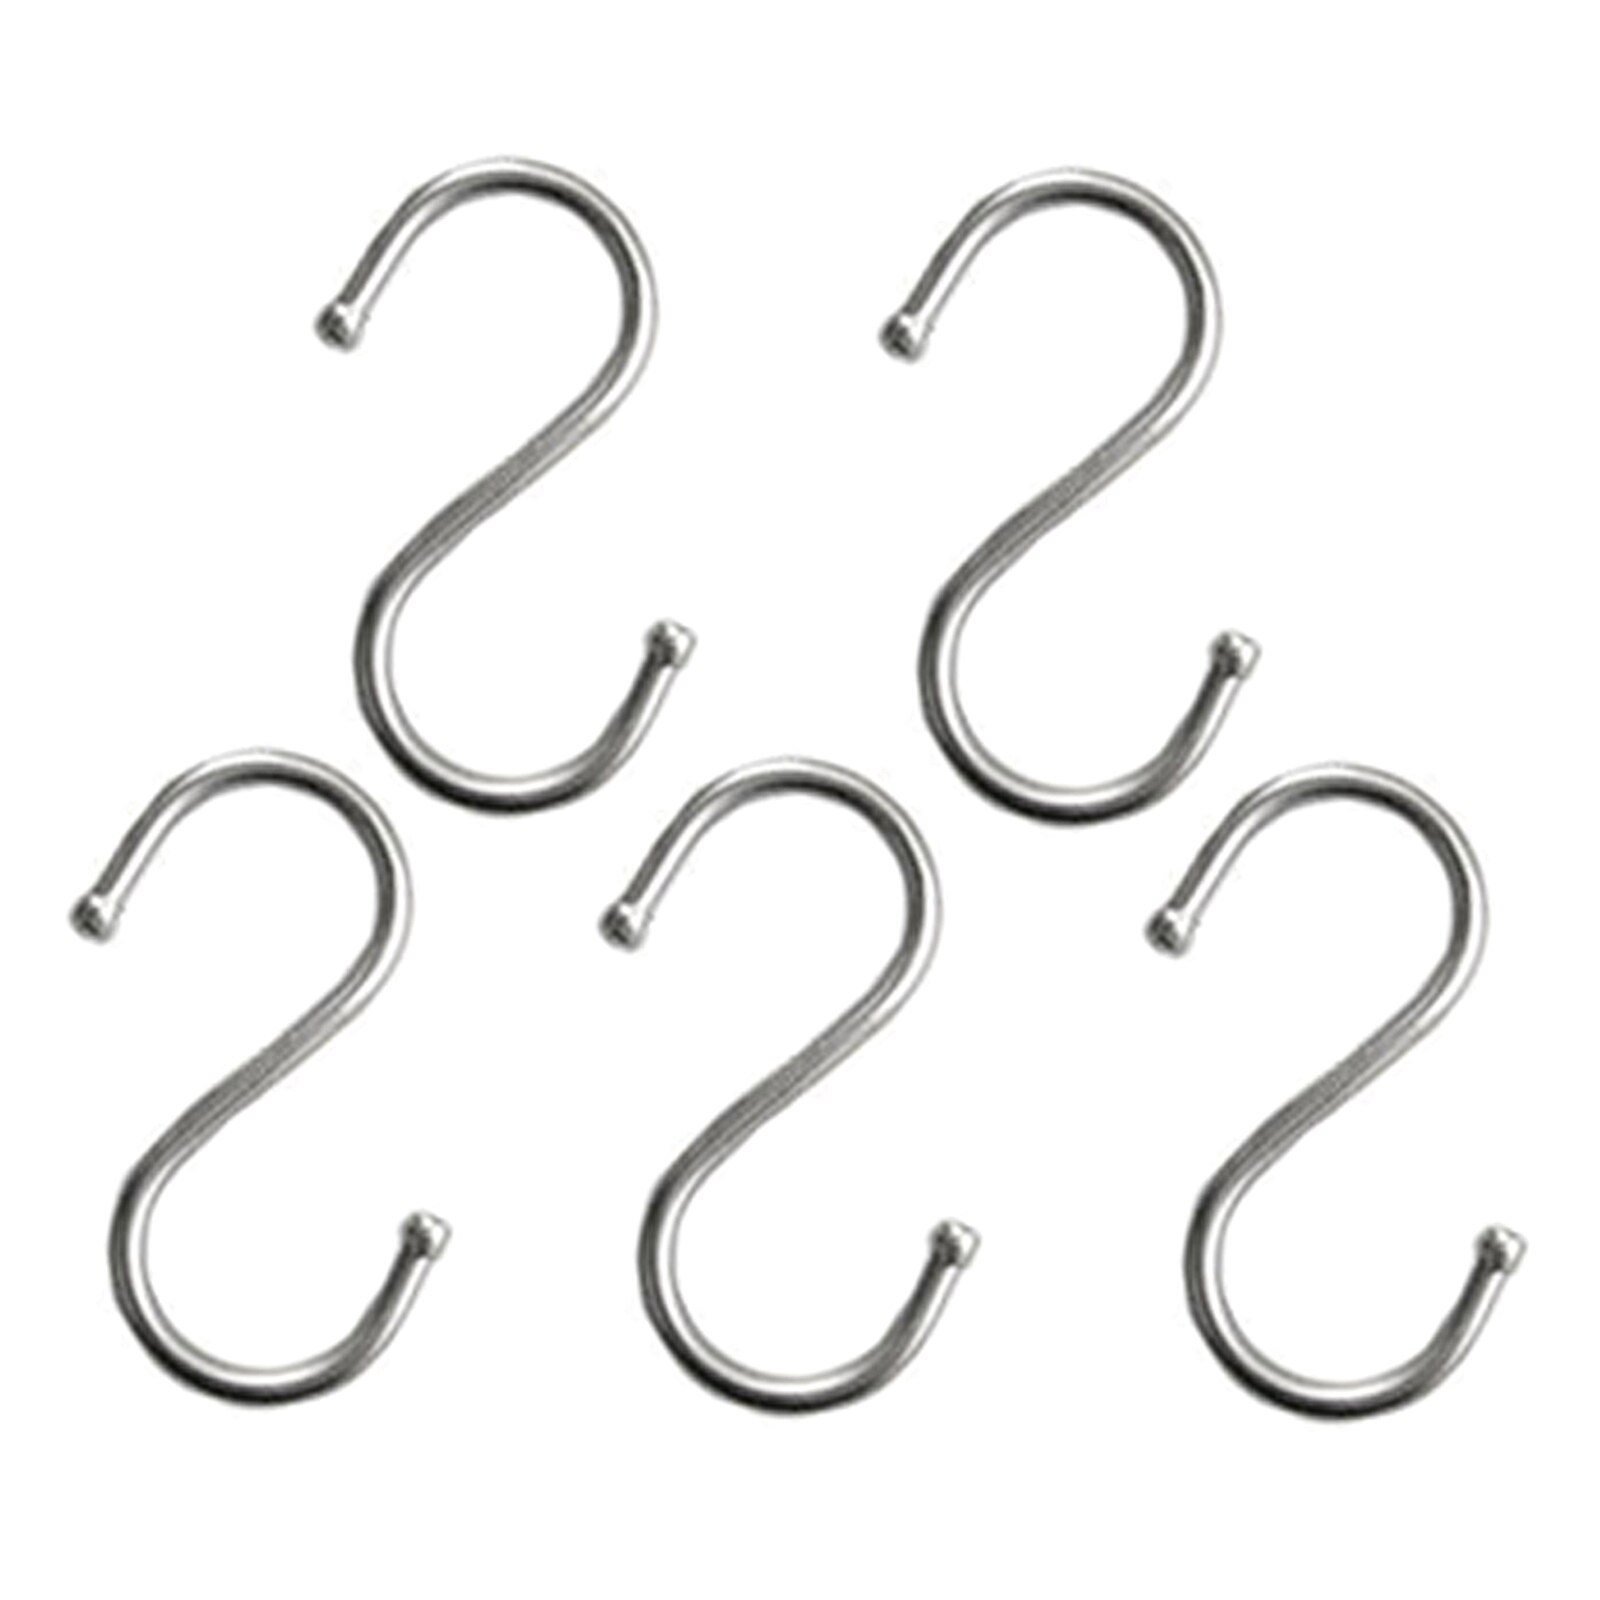 5pcs tainless Steel S Hooks, Drill-free Kithcen Rod Pan Pot Hanging Hook, Clothes Hanger Hook for Jeans Pants Scarfs Bags